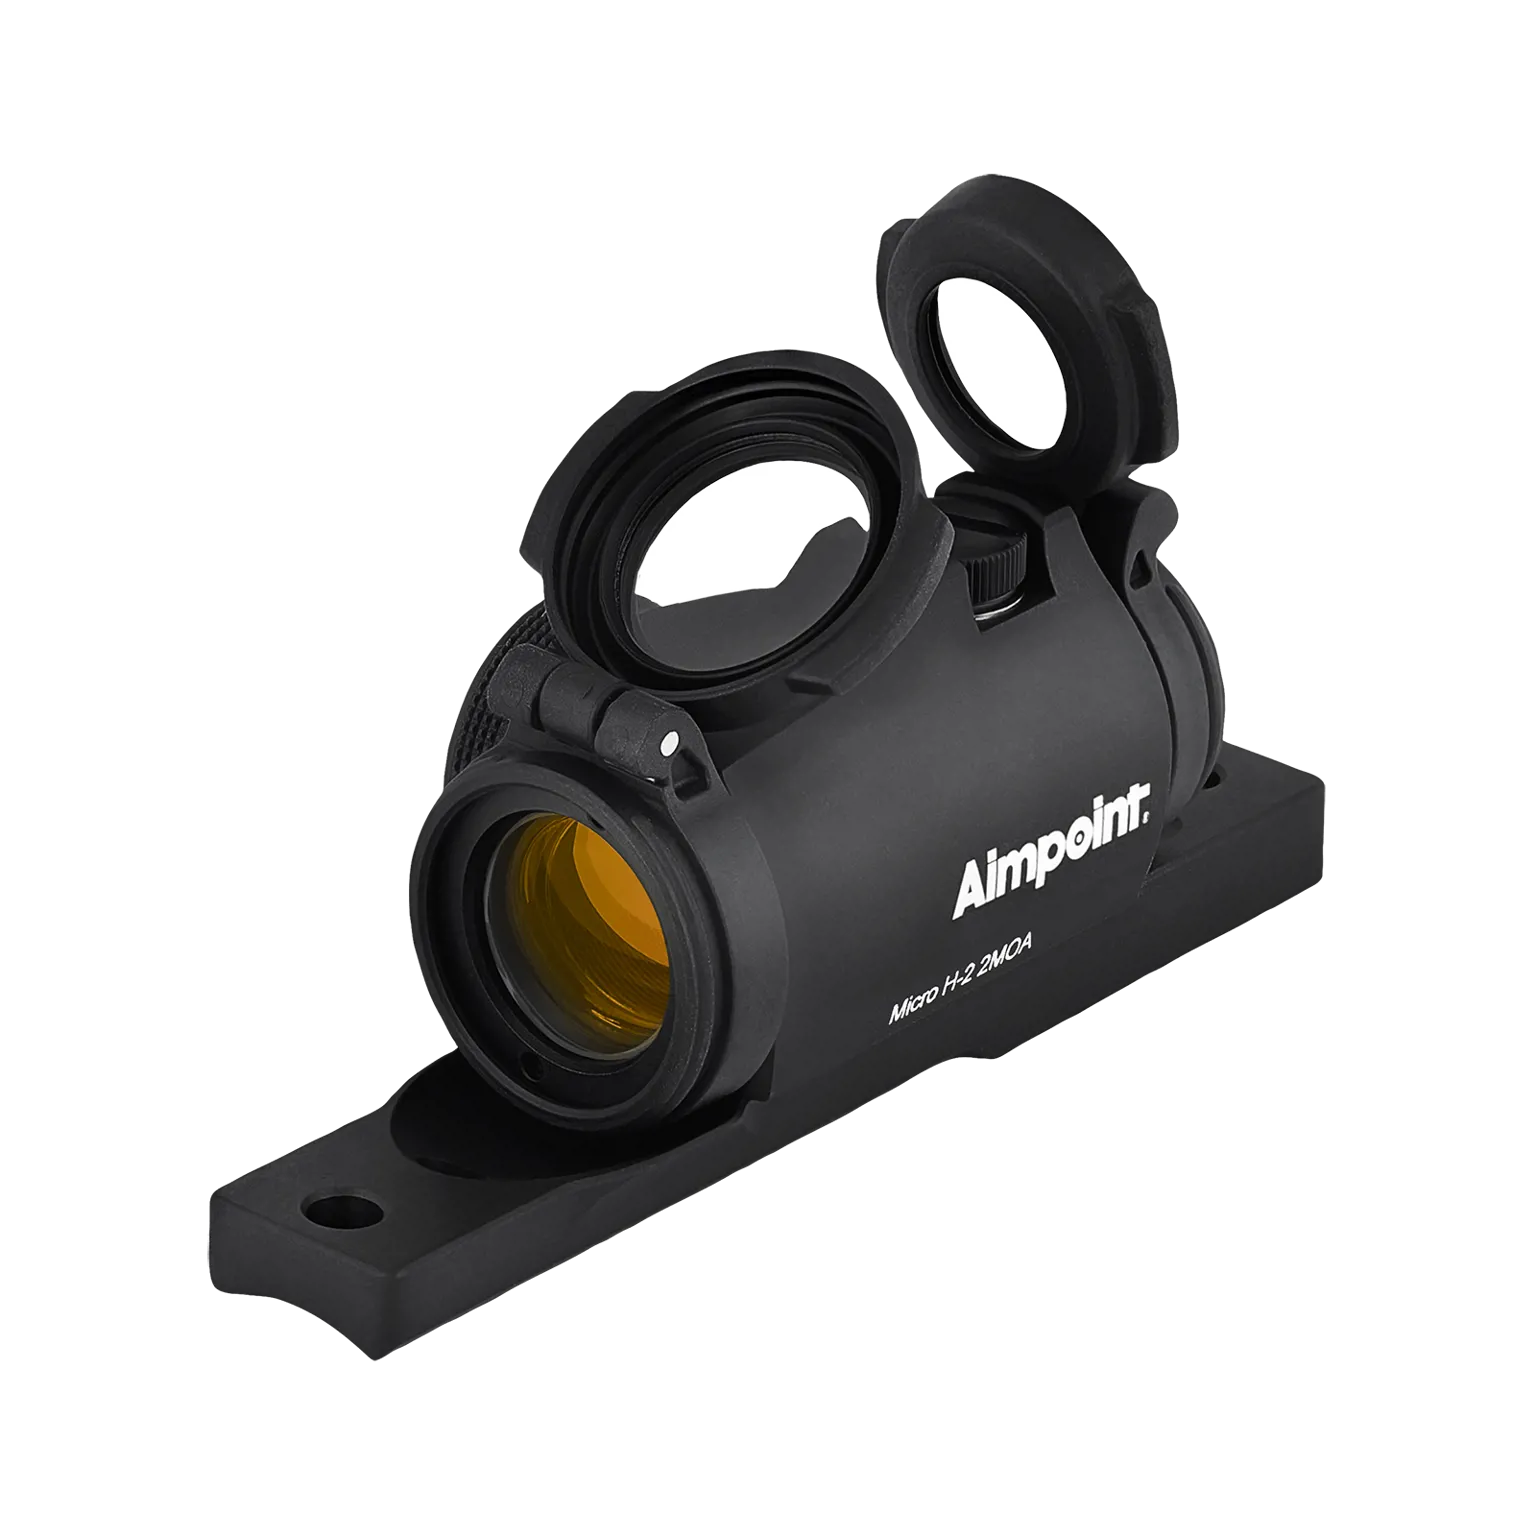 Micro H-2™ 2 MOA - Red dot reflex sight with mount for semi-automatic rifles - 1